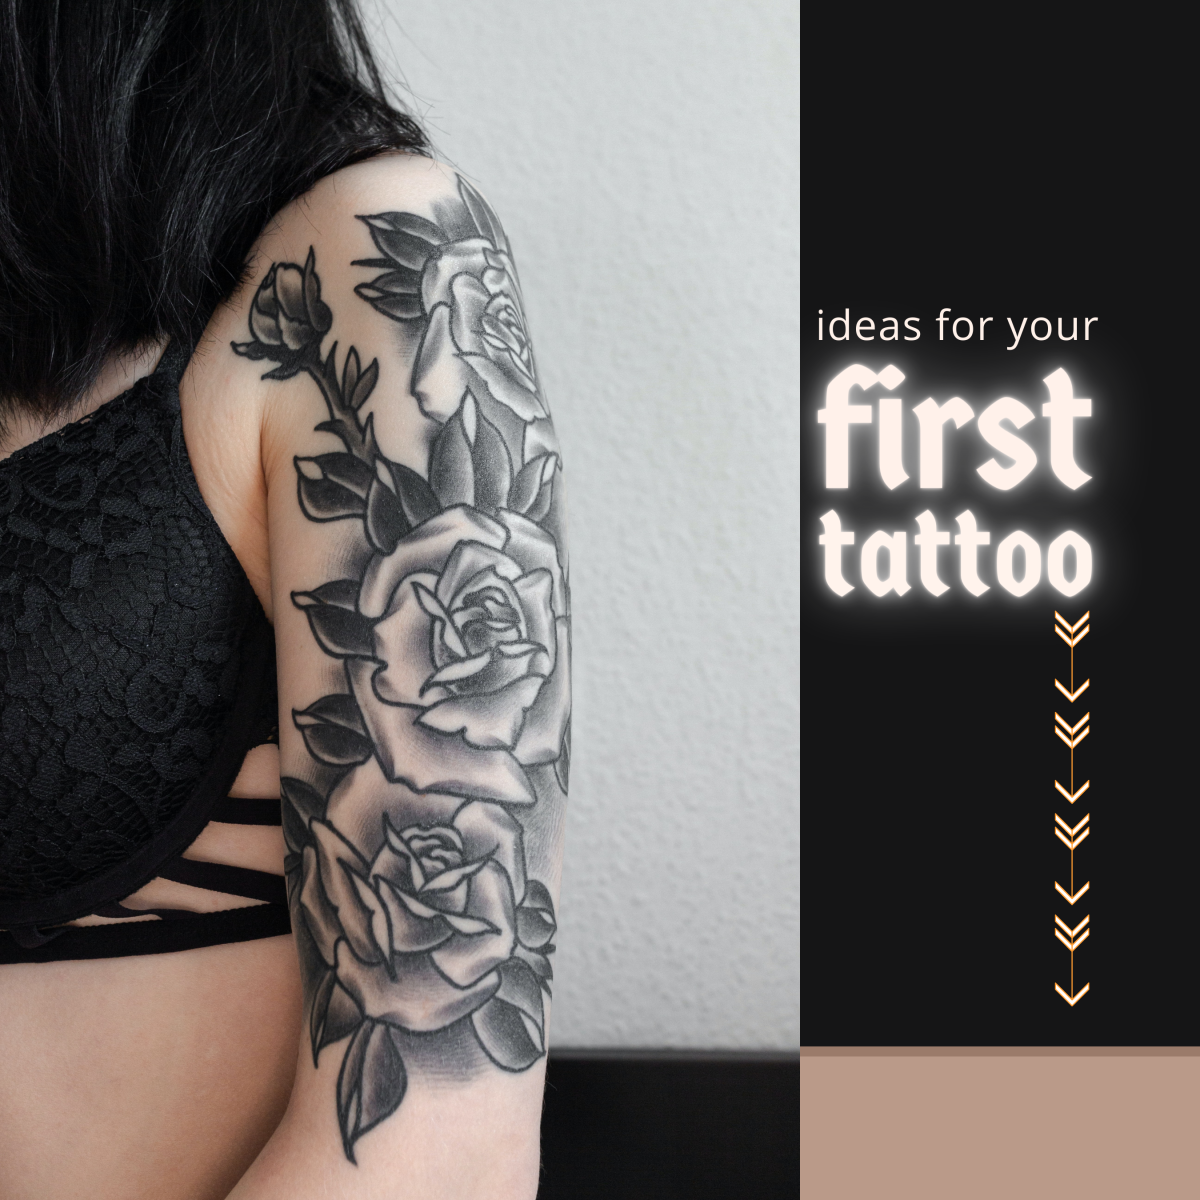 Your First Tattoo: Ideas, Designs, and Pictures